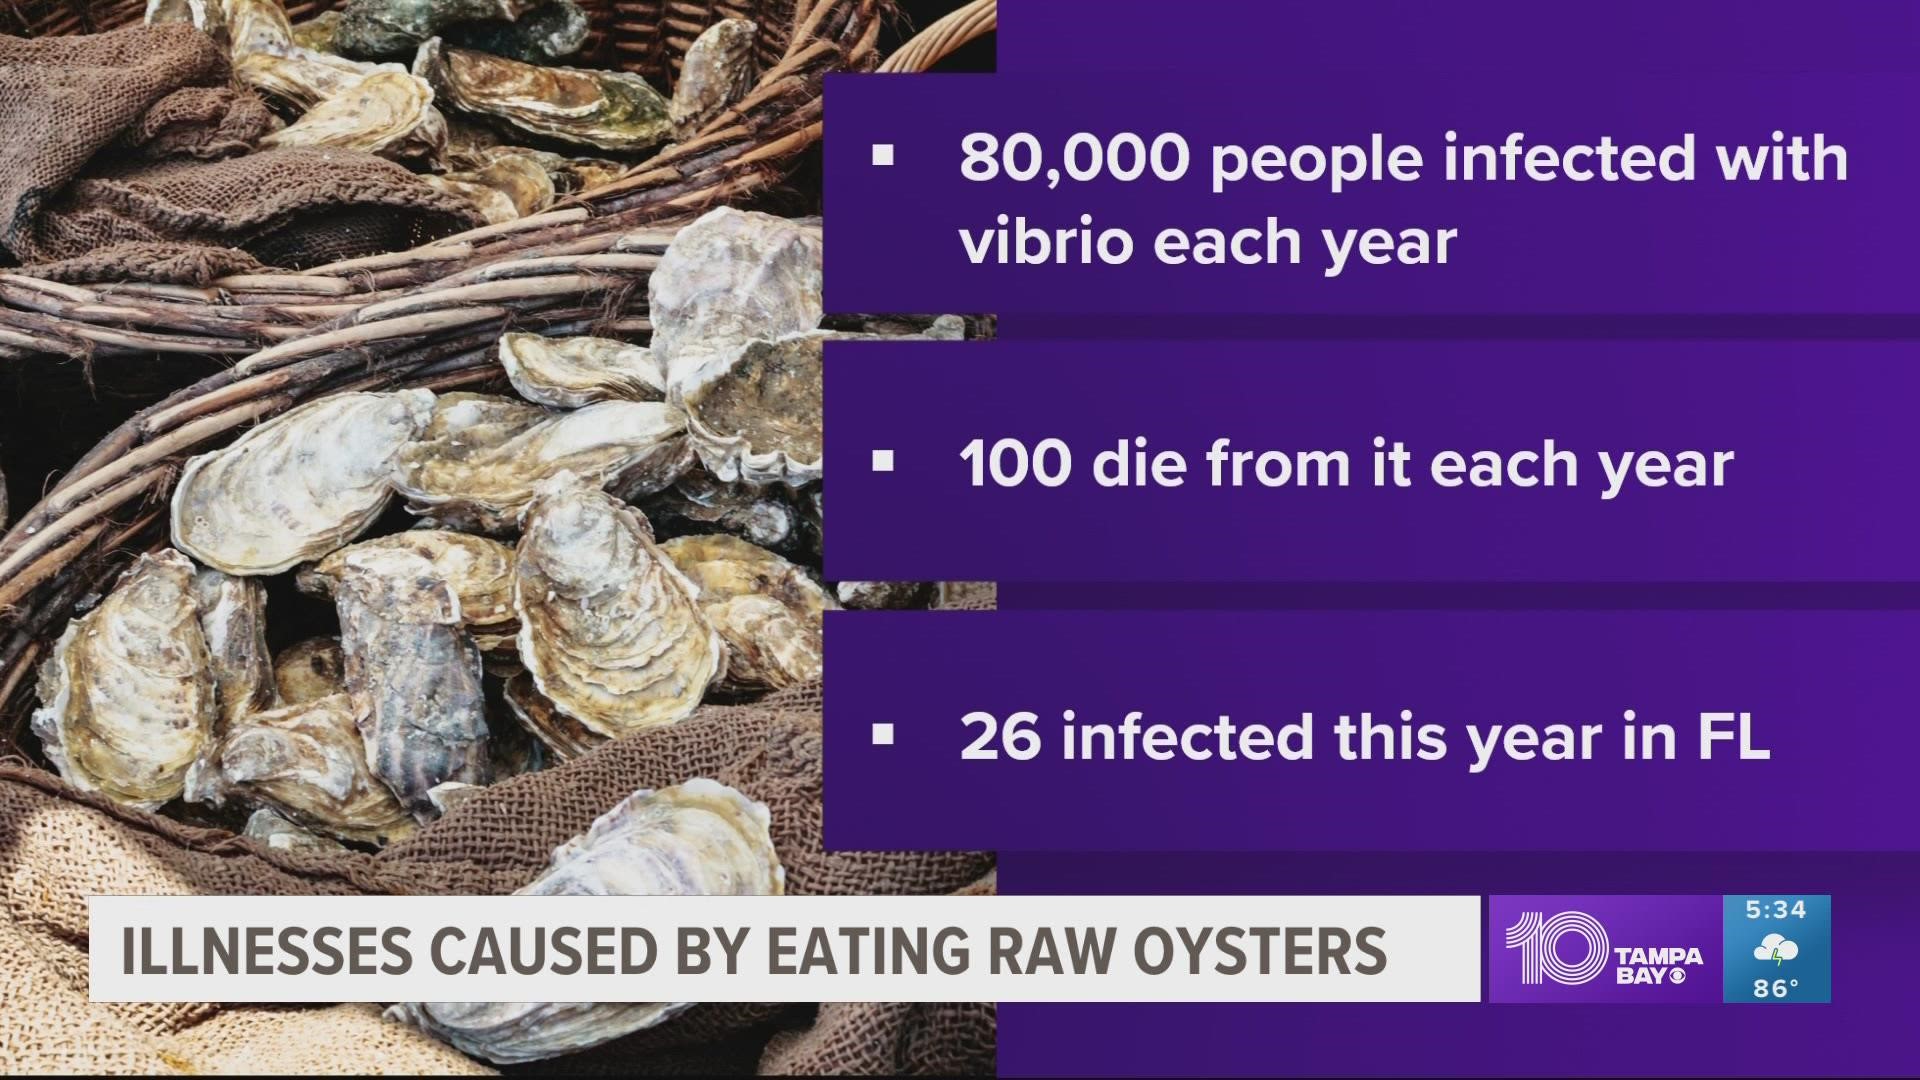 The Vibrio bacteria doesn't make an oyster look, smell or taste any different, which makes it hard to detect.